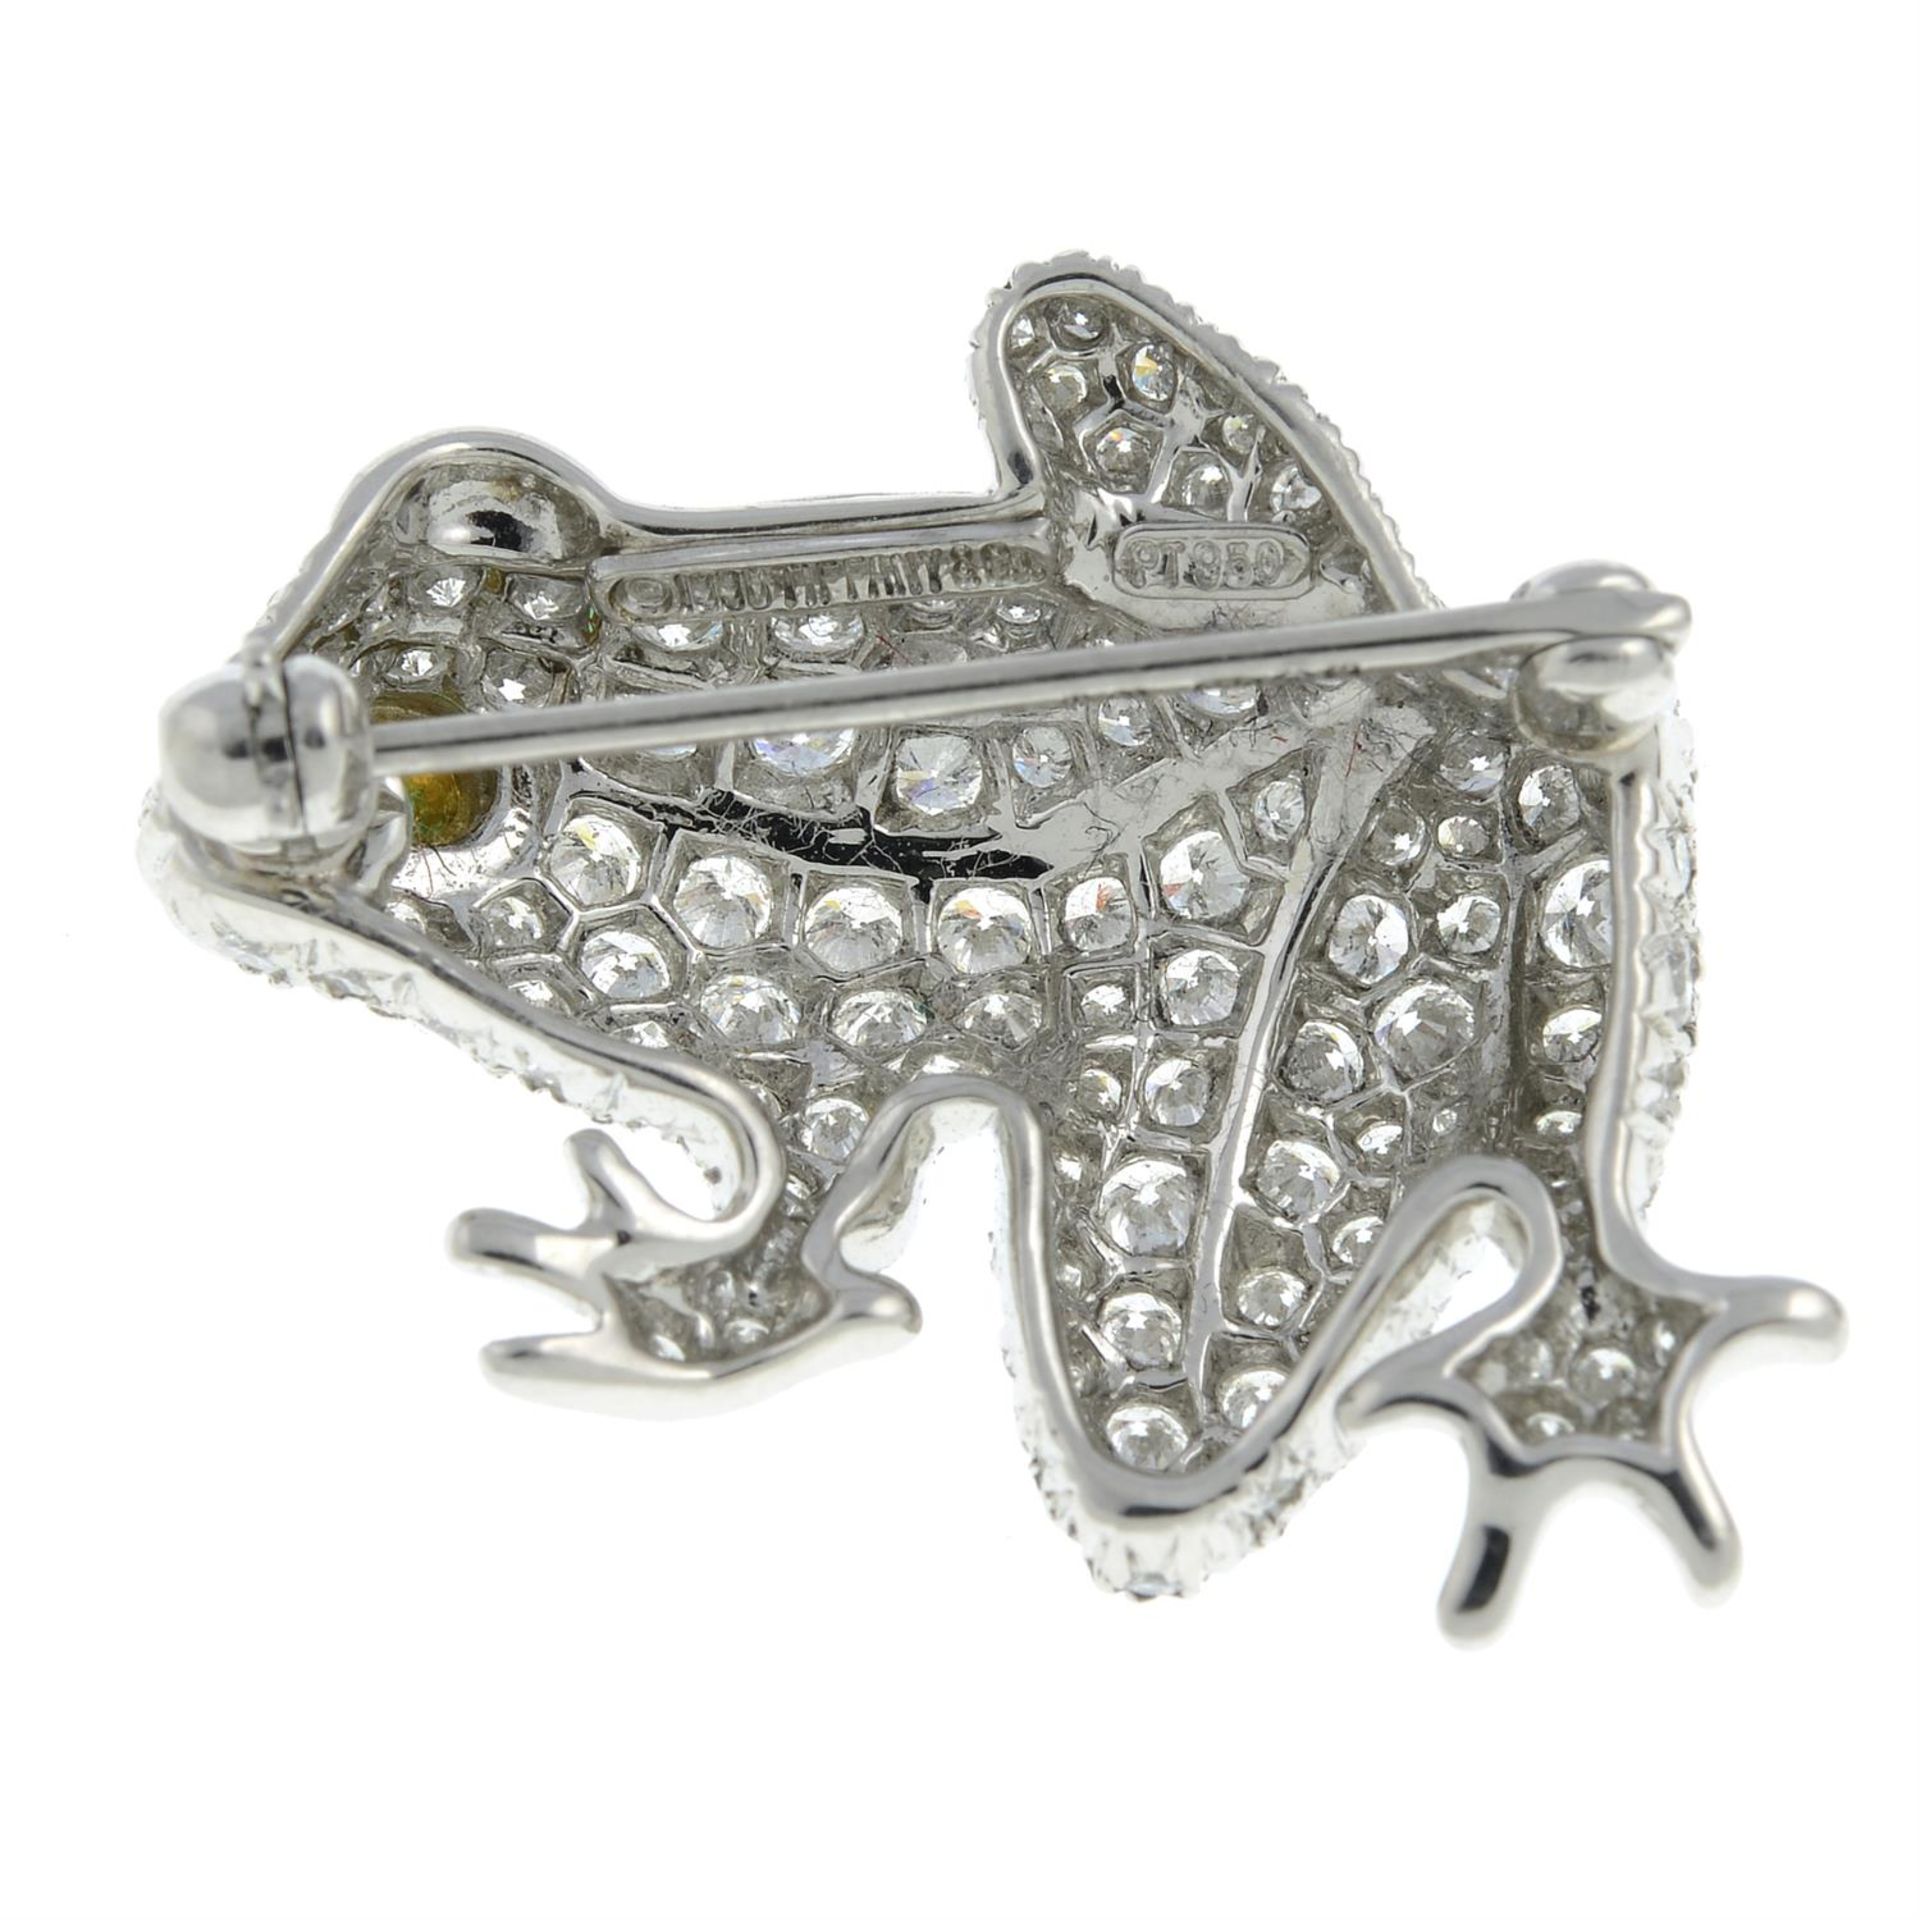 A platinum pavé-set diamond frog brooch, with emerald cabochon eye, by Tiffany & Co. - Image 3 of 4